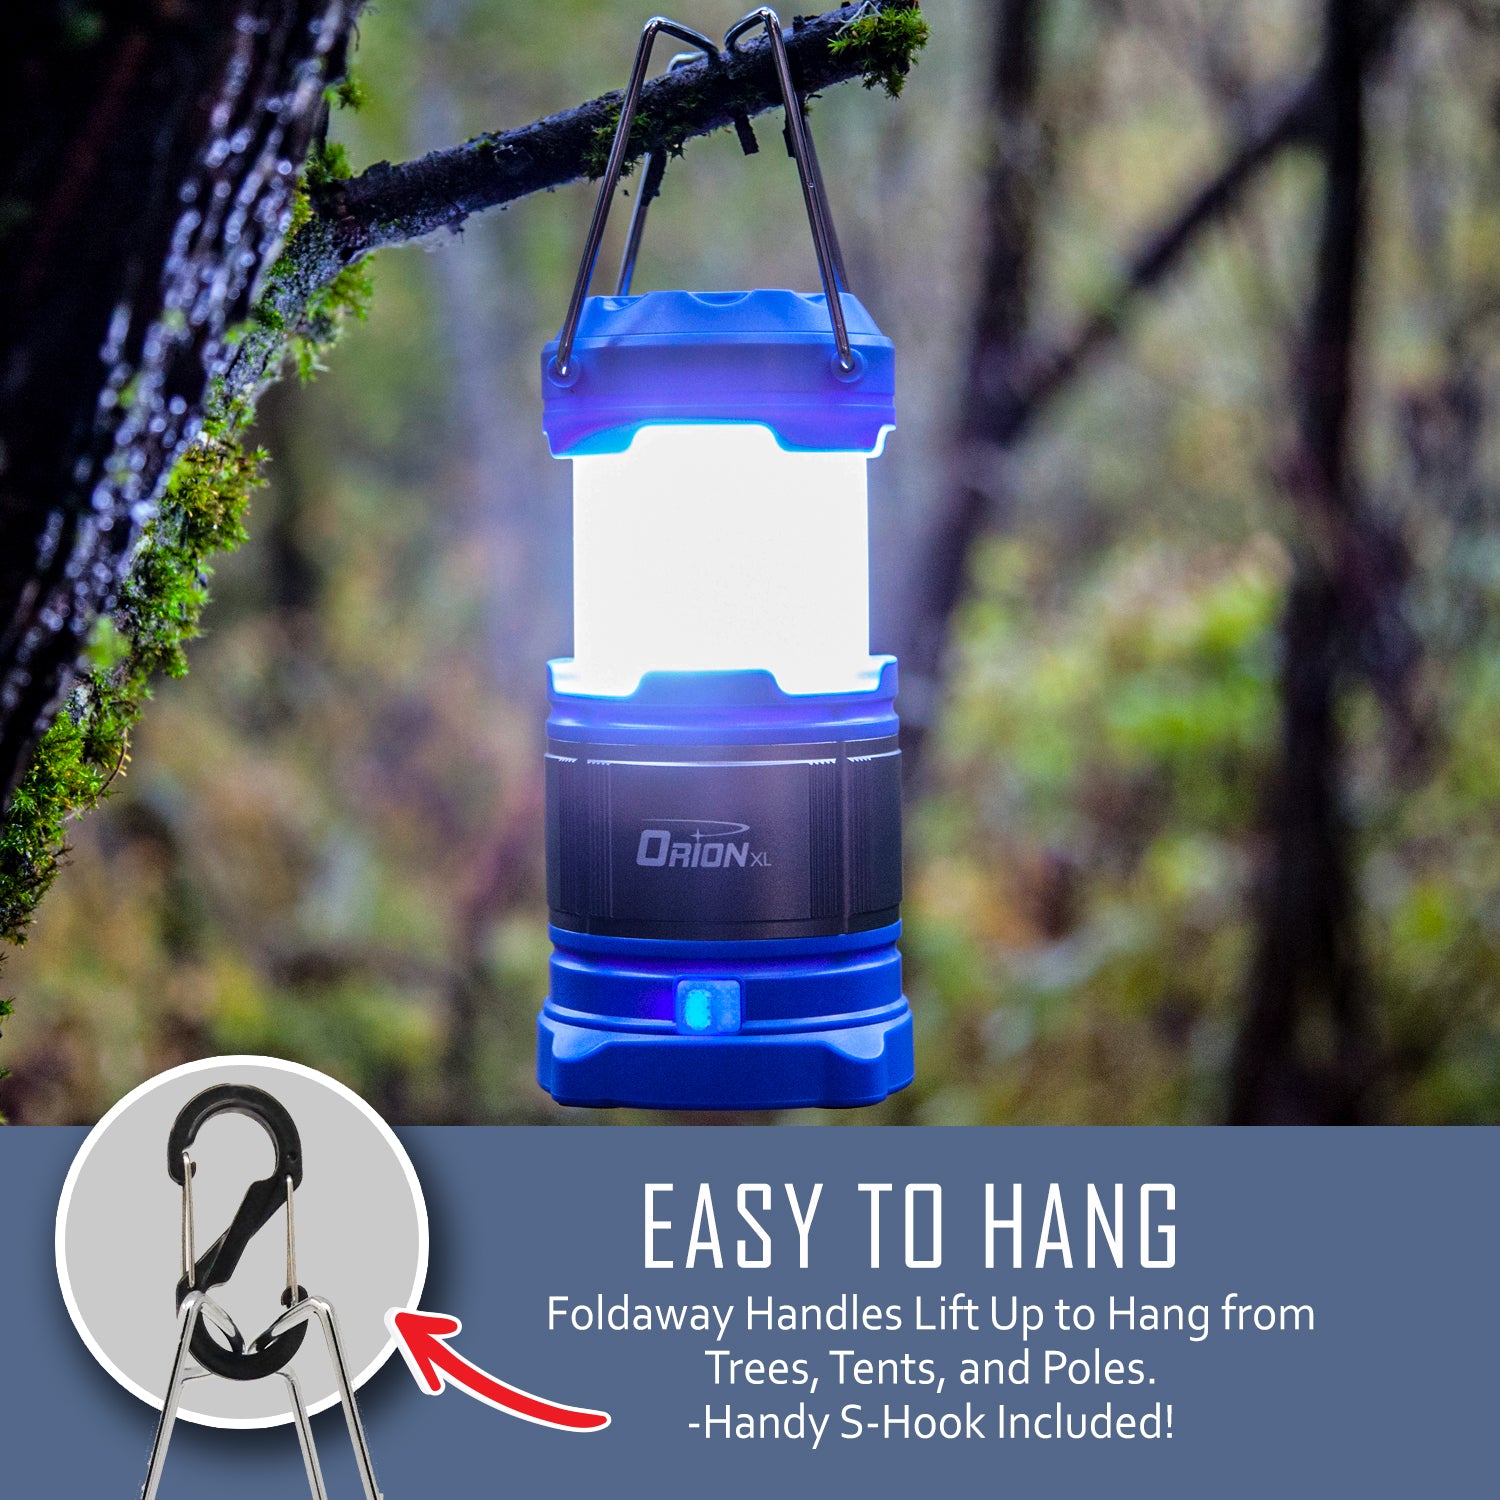 PORTAL Camping Lantern Rechargeable, Portable LED Flashlight Lantern,  Camping Light for Power Outages, Emergency, Outdoor Hiking, Hurricane,  Survival